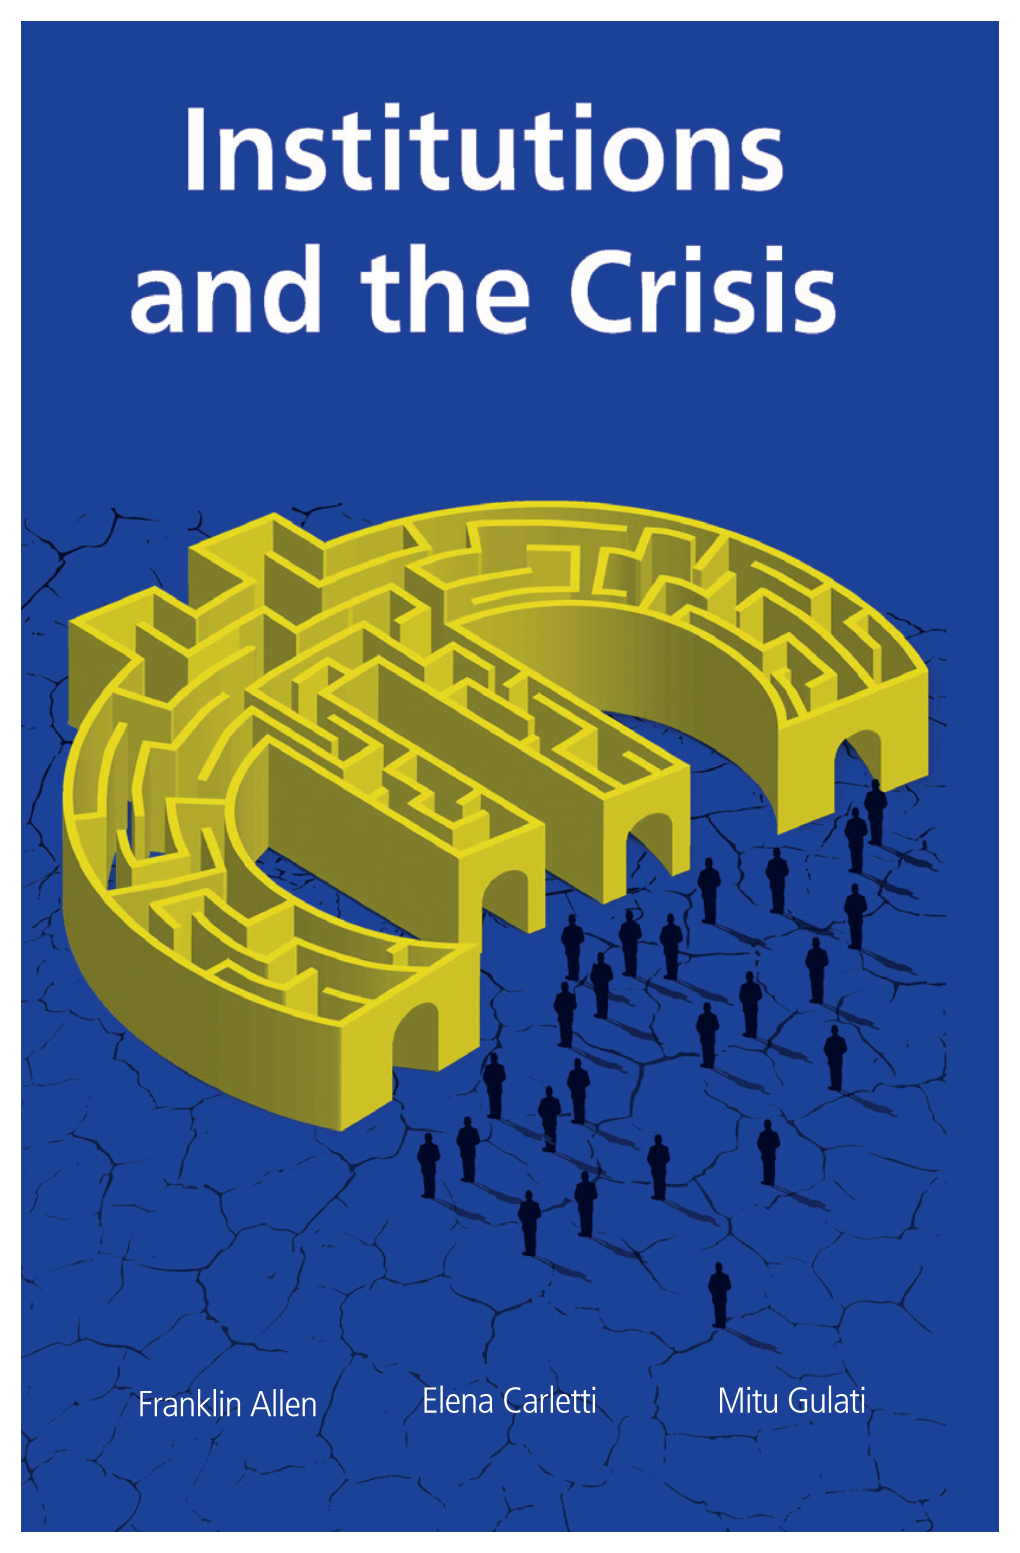 Institutions and the Crisis”, Which Was Held at the EUI in Florence, Italy, on 26 April 2018